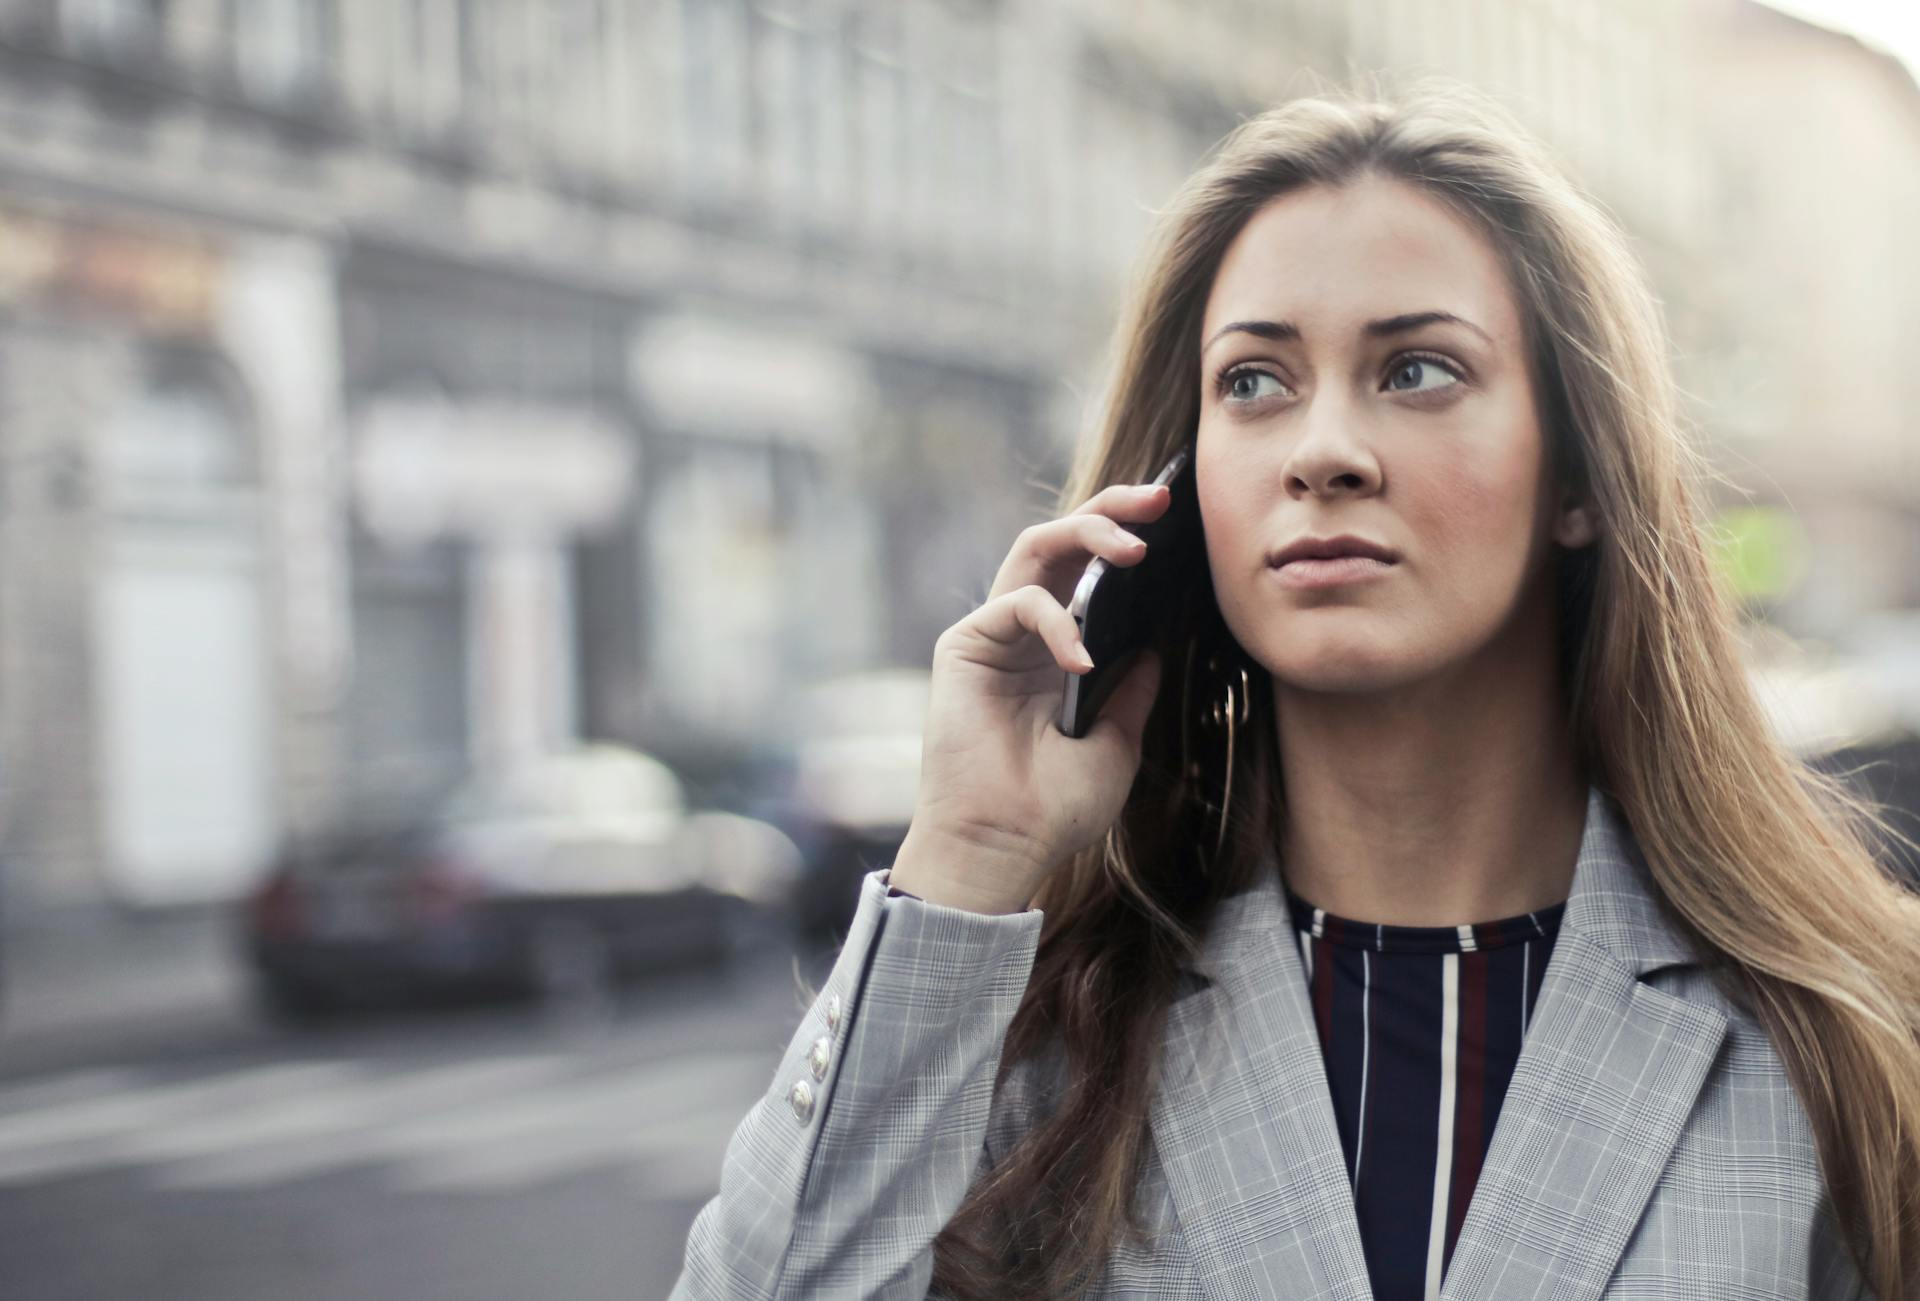 A woman speaking on the phone | Source: Pexels